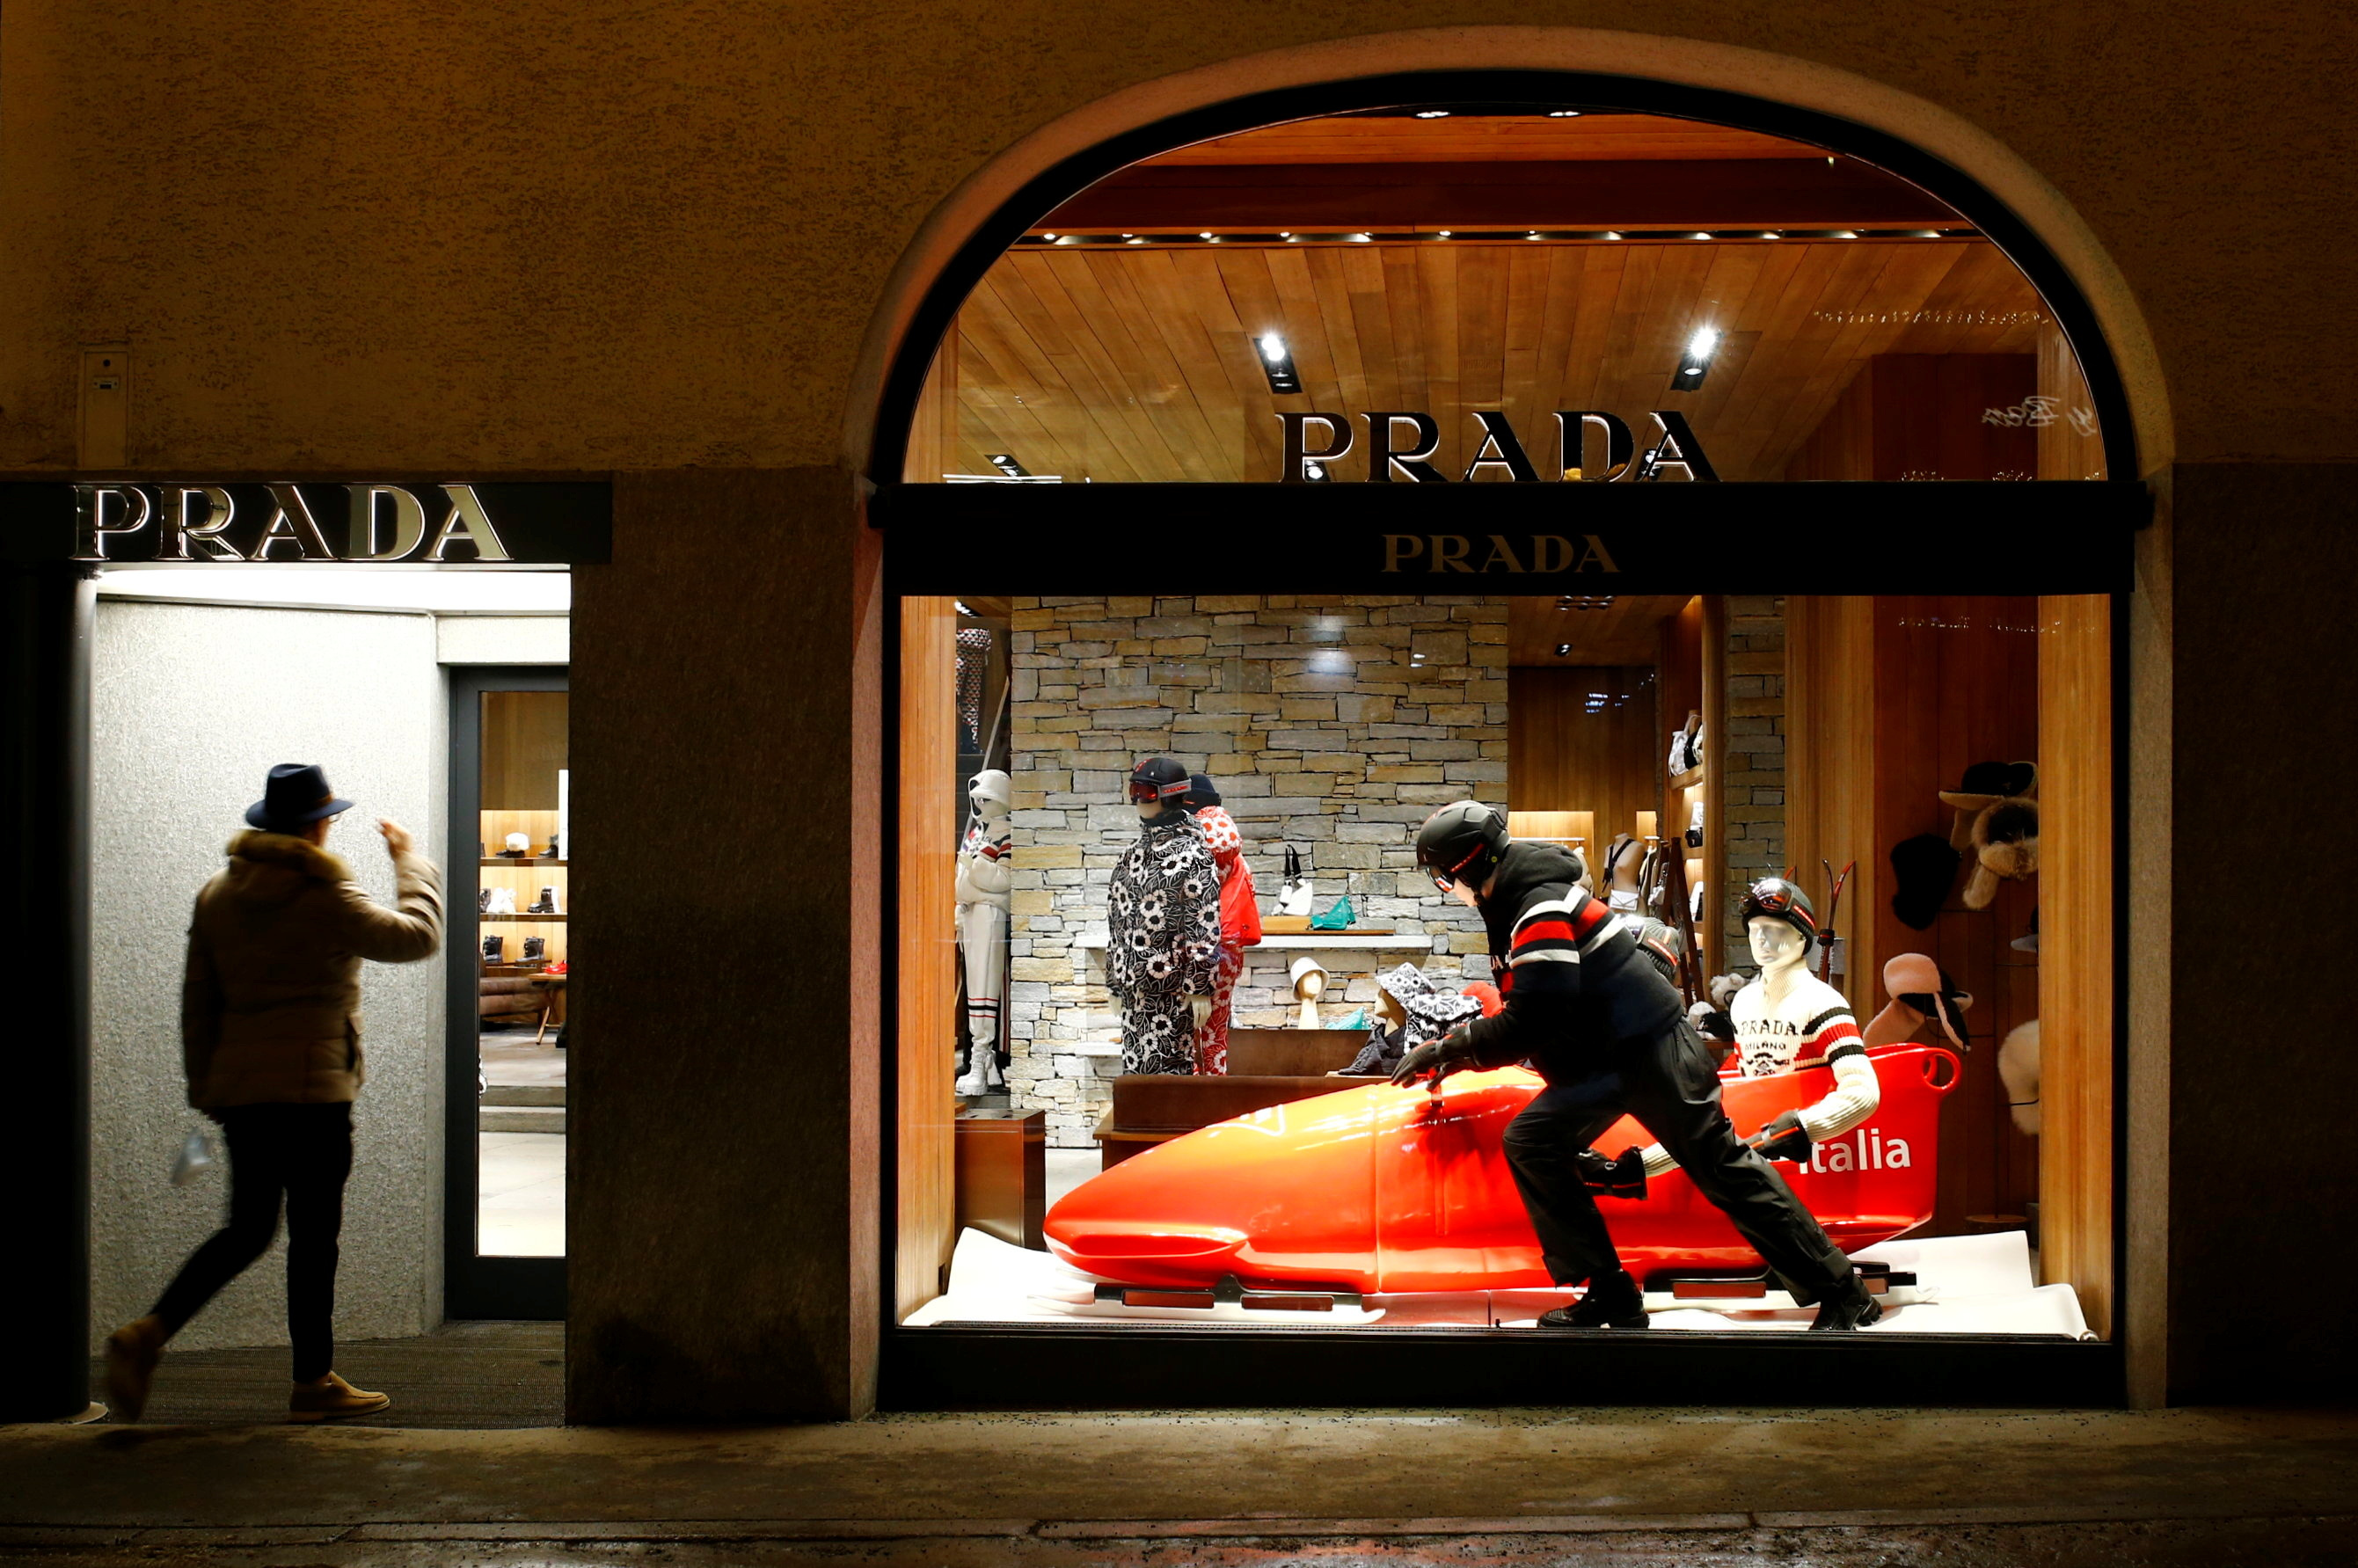 A bobsleigh is used as decoration at a Prada store in St. Moritz